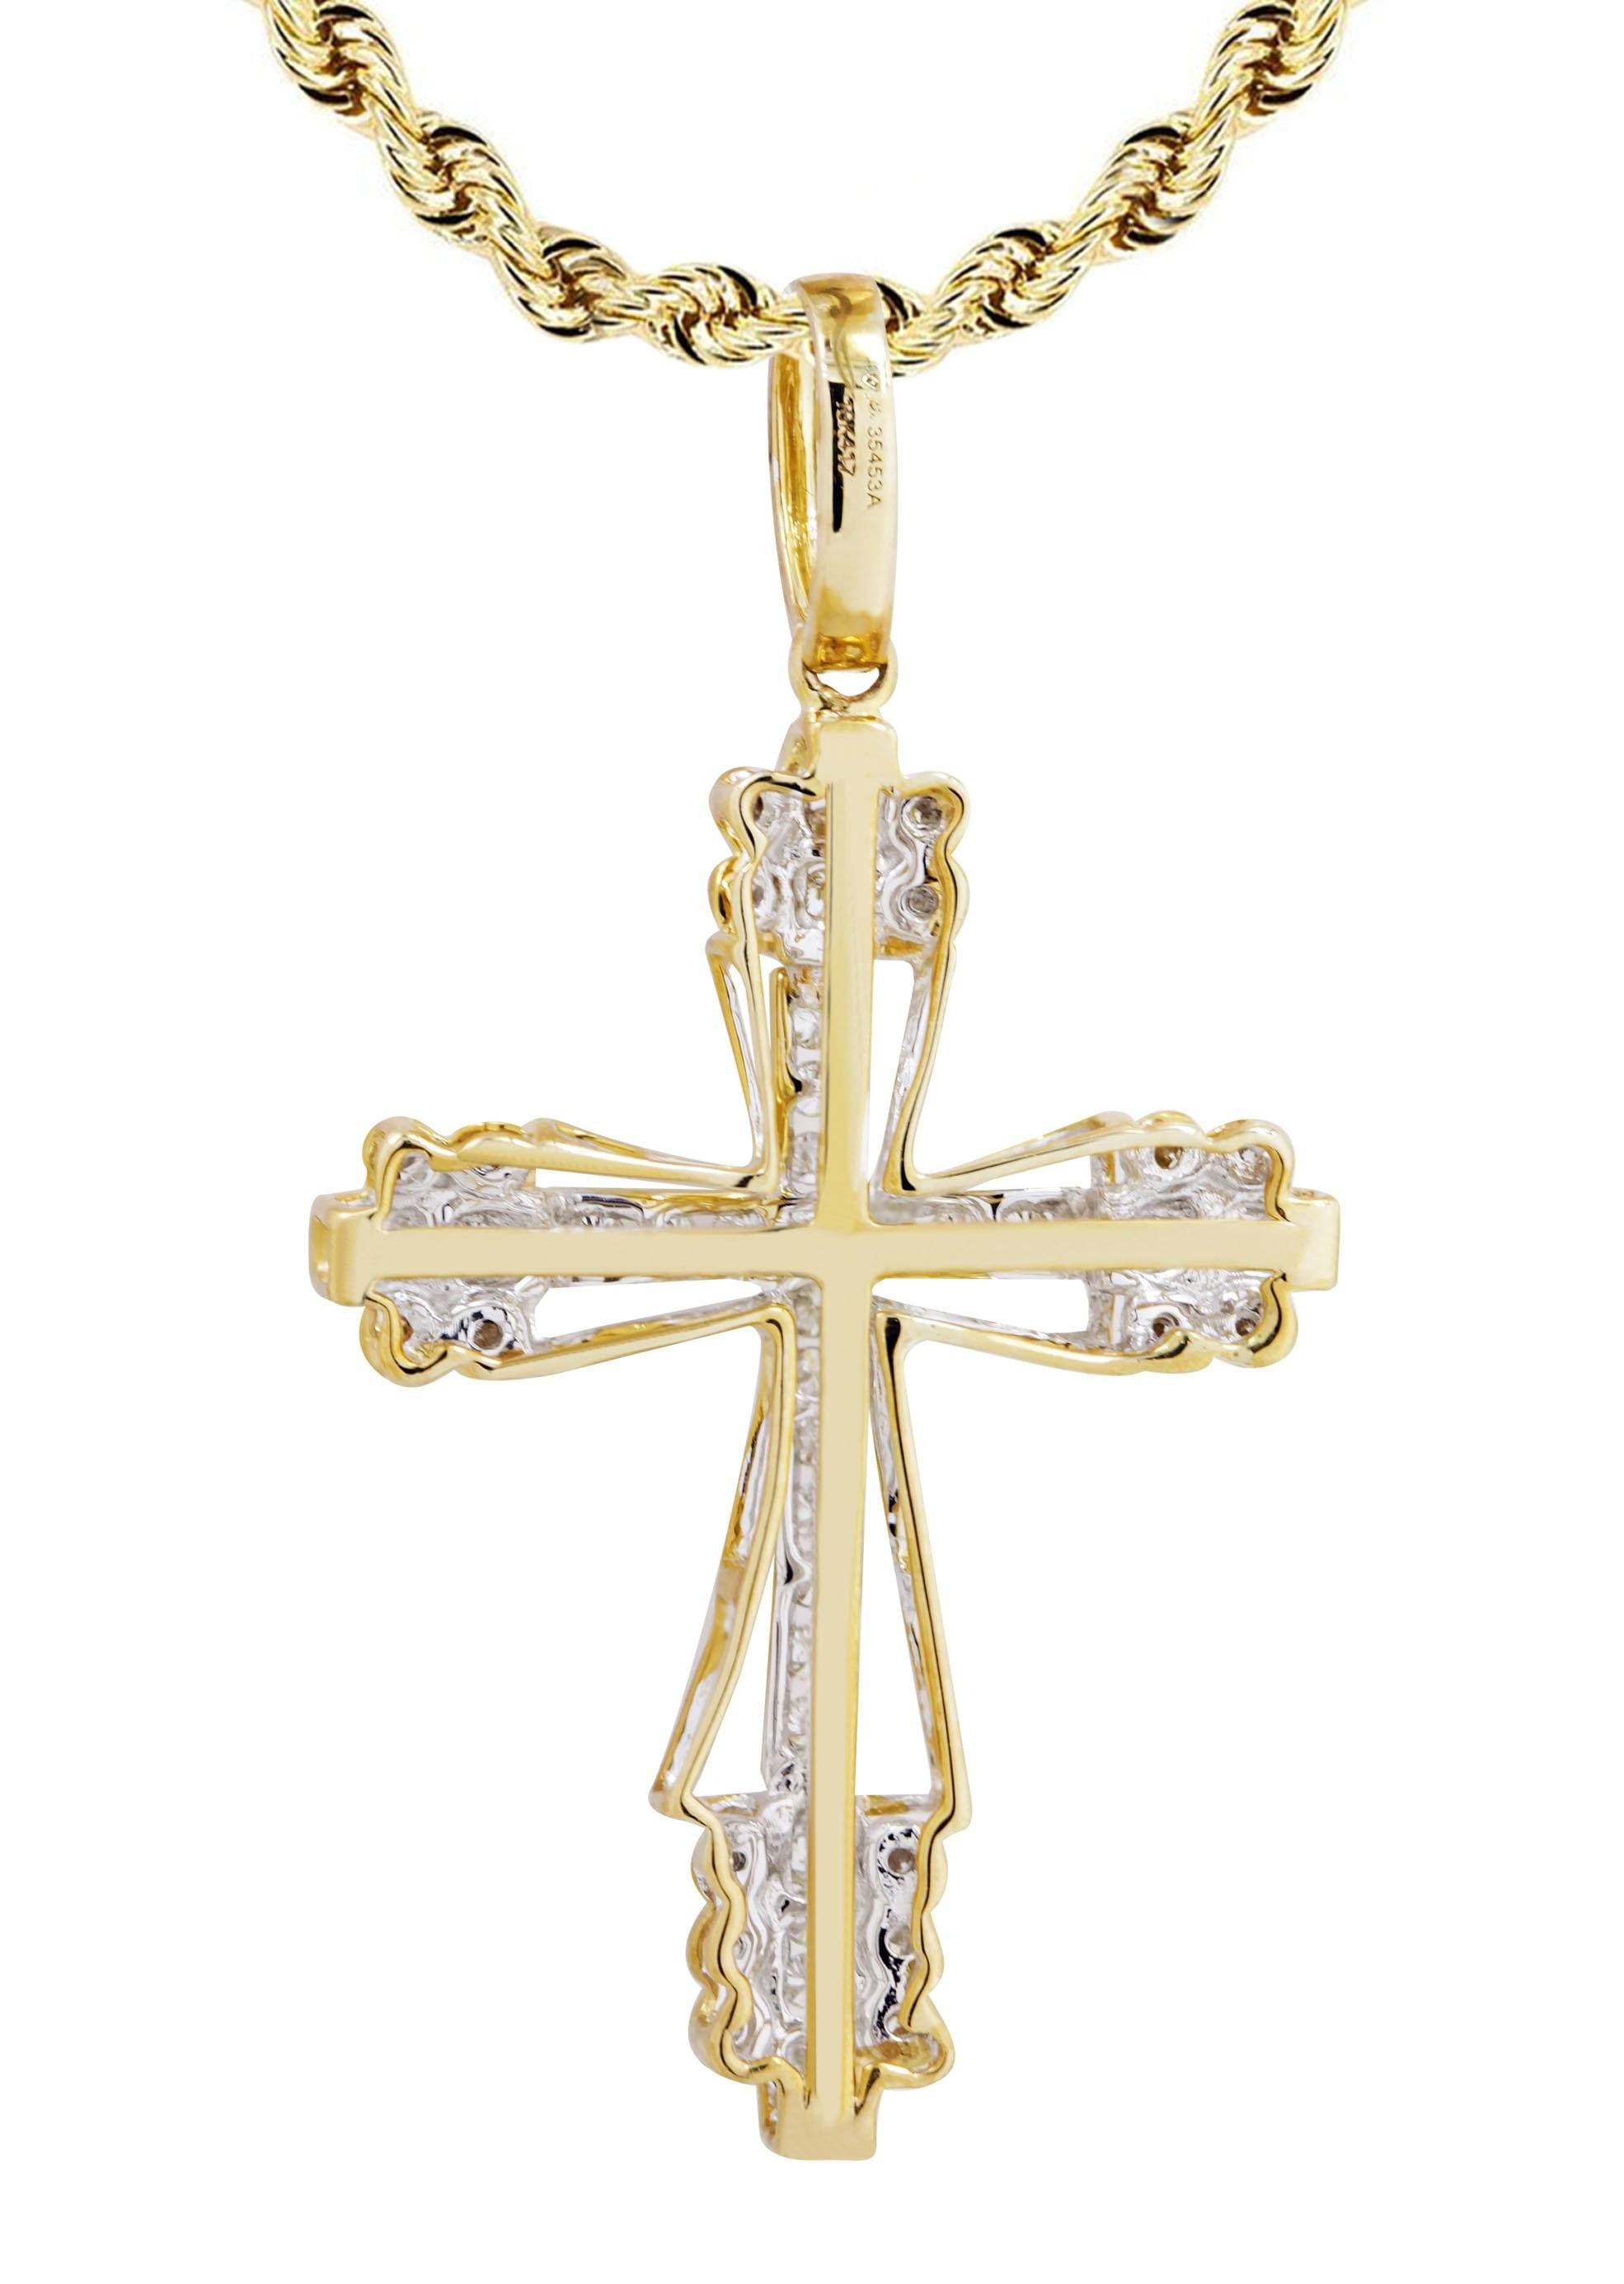 10K Yellow Gold Cross Pendant & Rope Chain | 0.62 Carats – FrostNYC